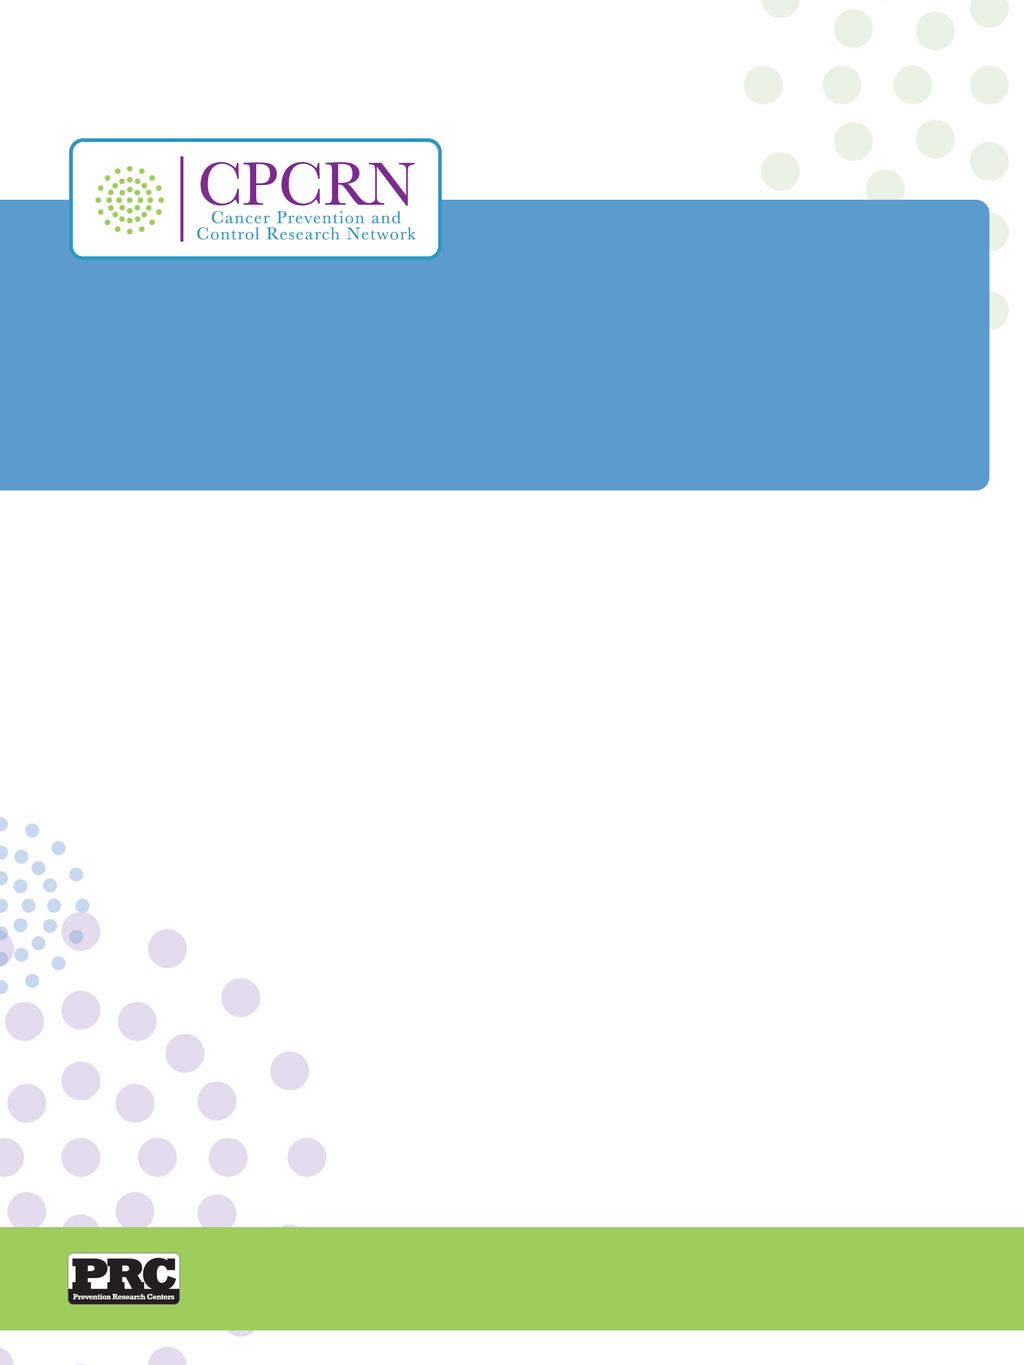 Impact of the Cancer Prevention and Control Research Network April 2018 A report on the activities, productivity, and impact of CPCRN over the past year, across the current funding cycle, and across